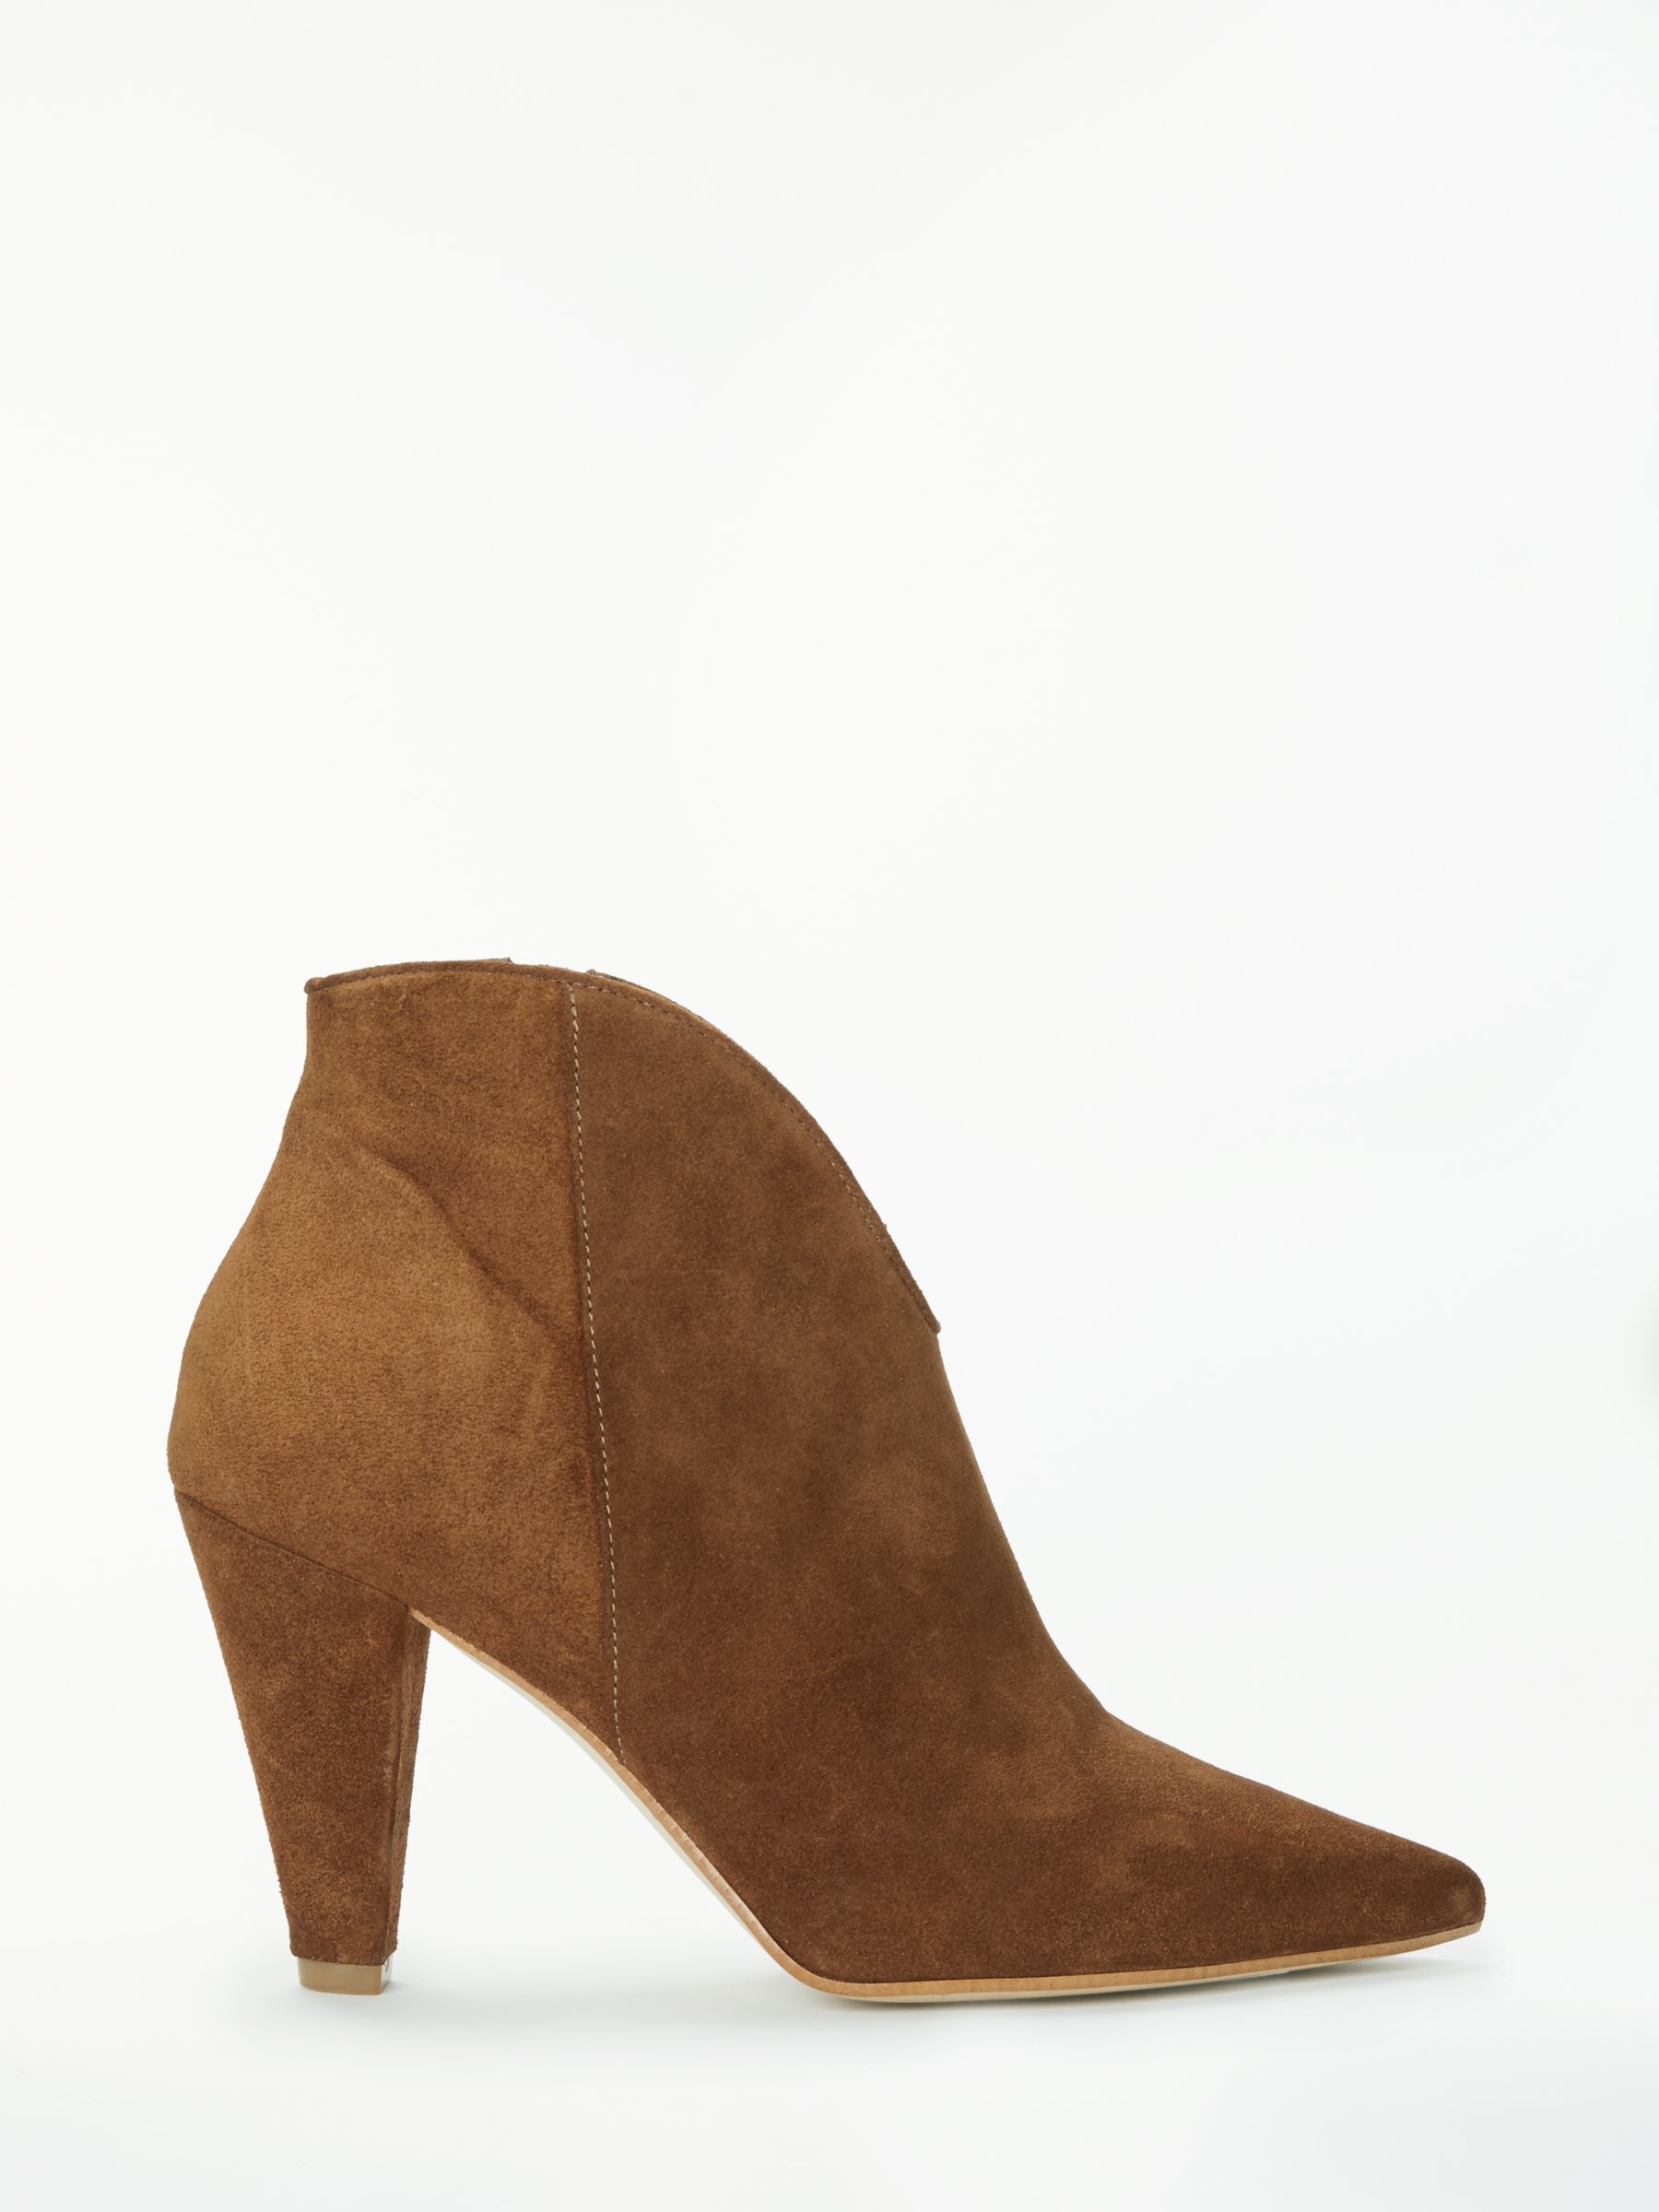 John Lewis & Partners Olympia Cone Heel Ankle Boots